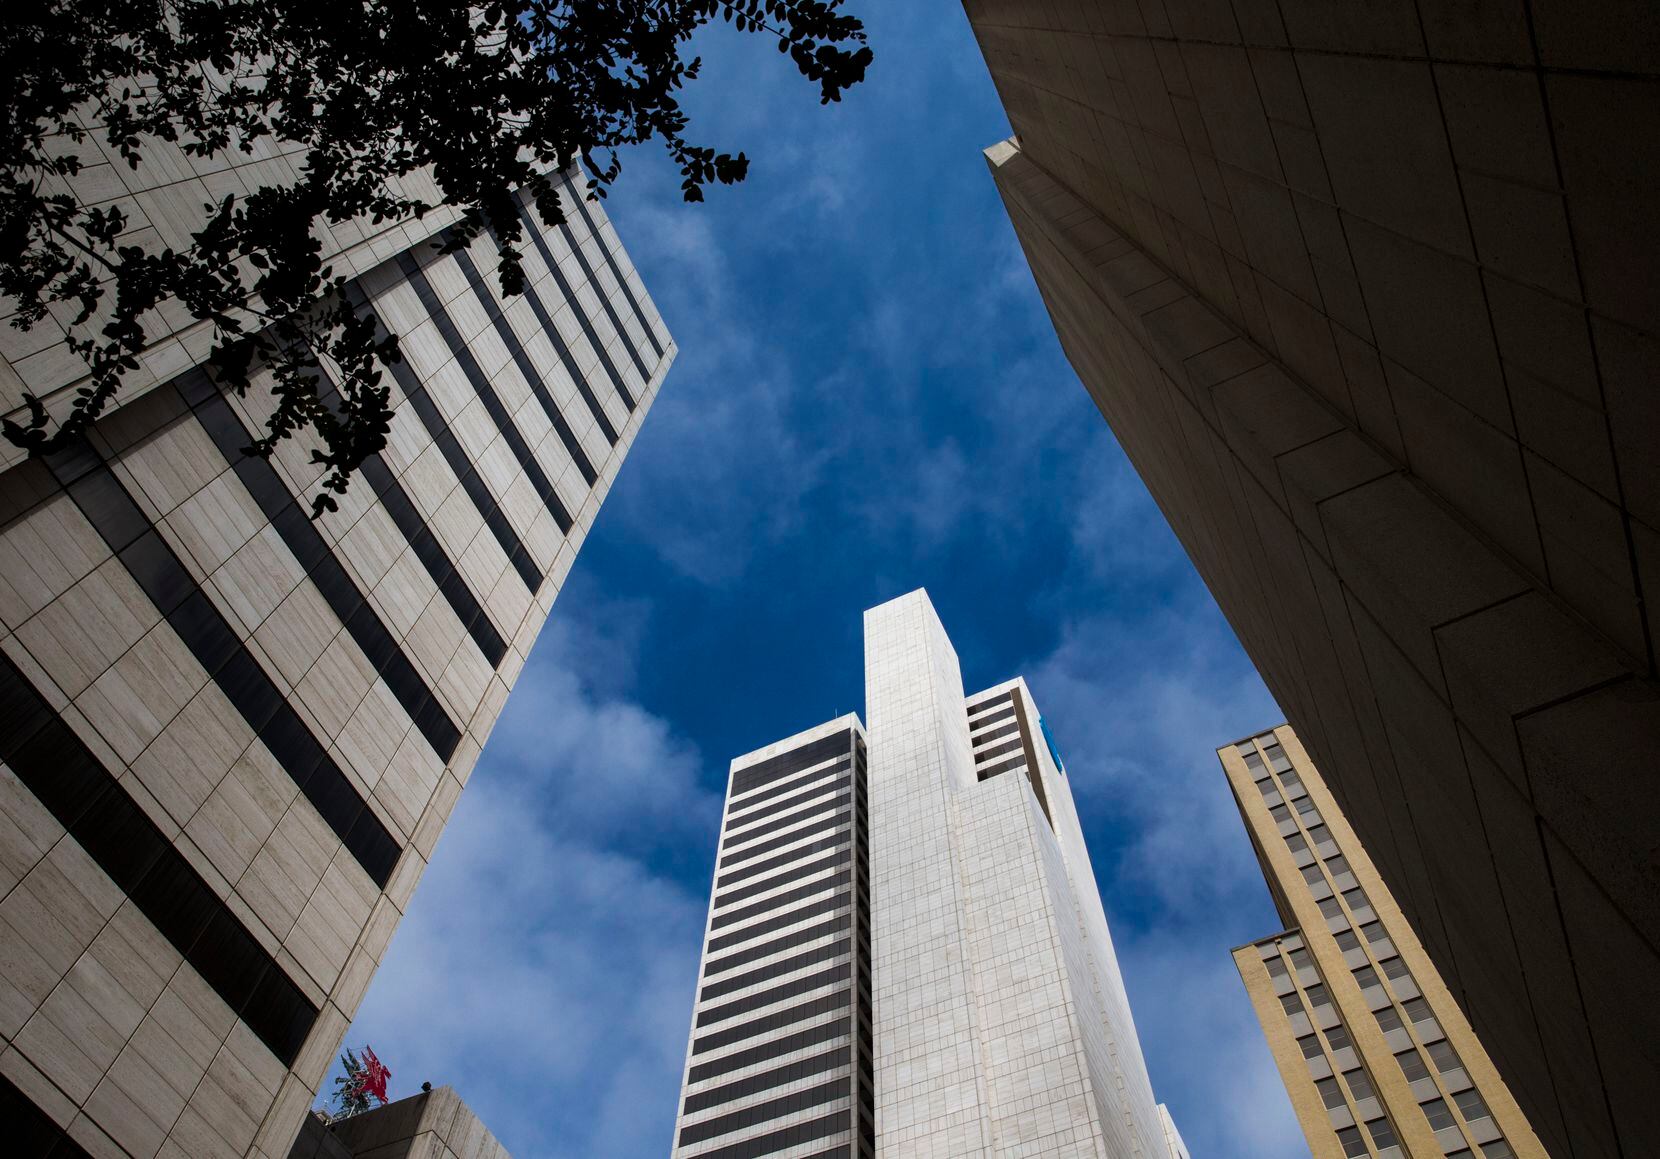 AT&T has four high-rise buildings at Commerce and Akard streets in downtown Dallas.